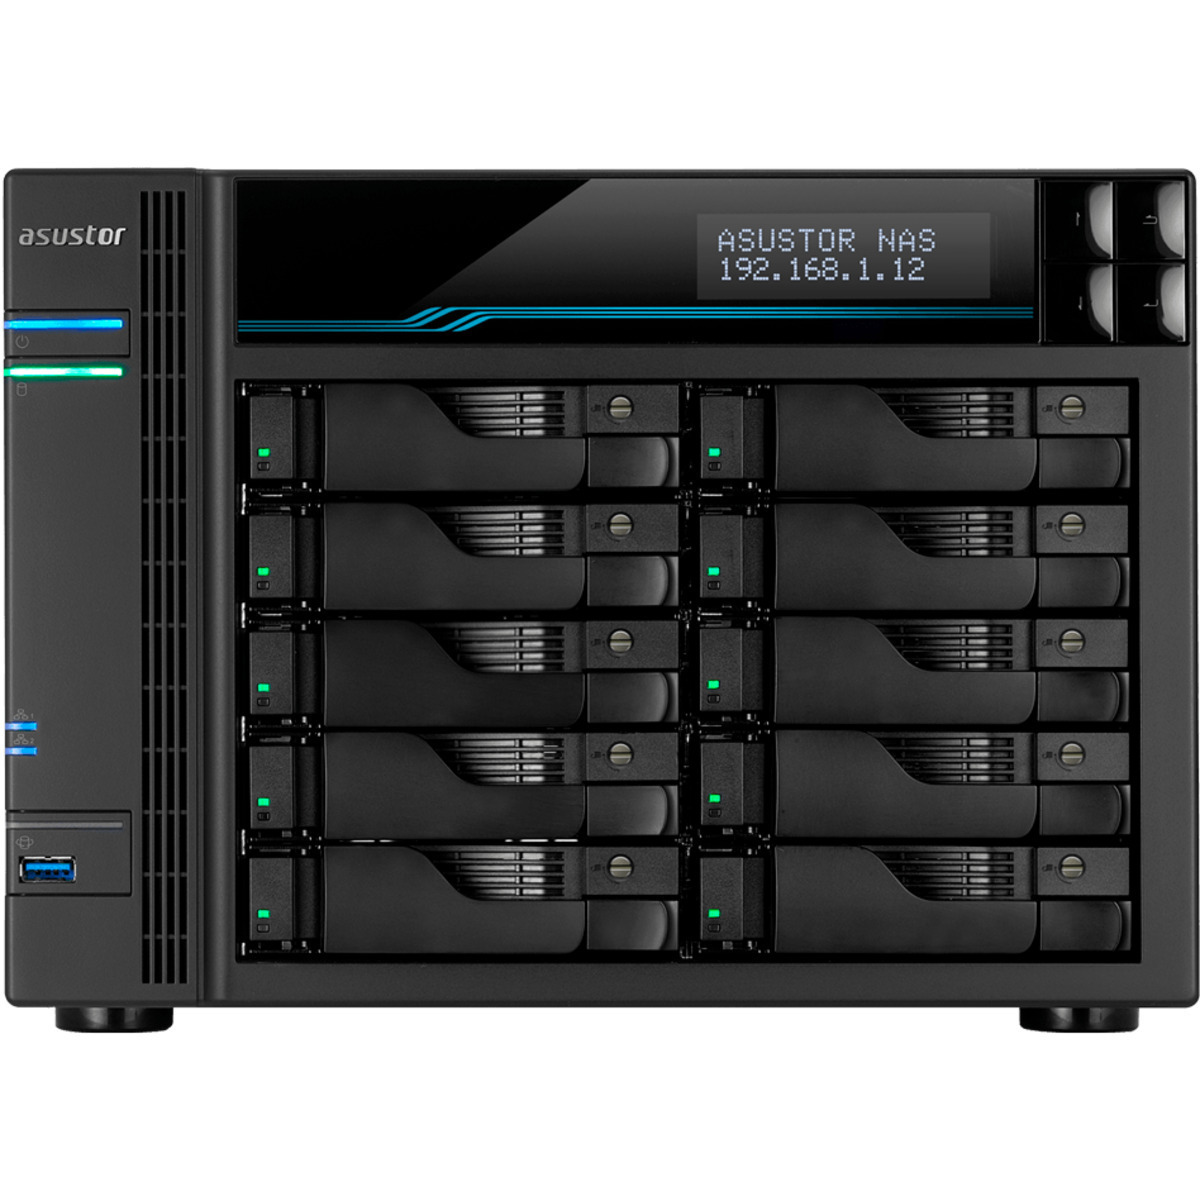 ASUSTOR AS7110T Lockerstor 10 Pro 48tb 10-Bay Desktop Multimedia / Power User / Business NAS - Network Attached Storage Device 8x6tb Seagate IronWolf ST6000VN006 3.5 5400rpm SATA 6Gb/s HDD NAS Class Drives Installed - Burn-In Tested AS7110T Lockerstor 10 Pro